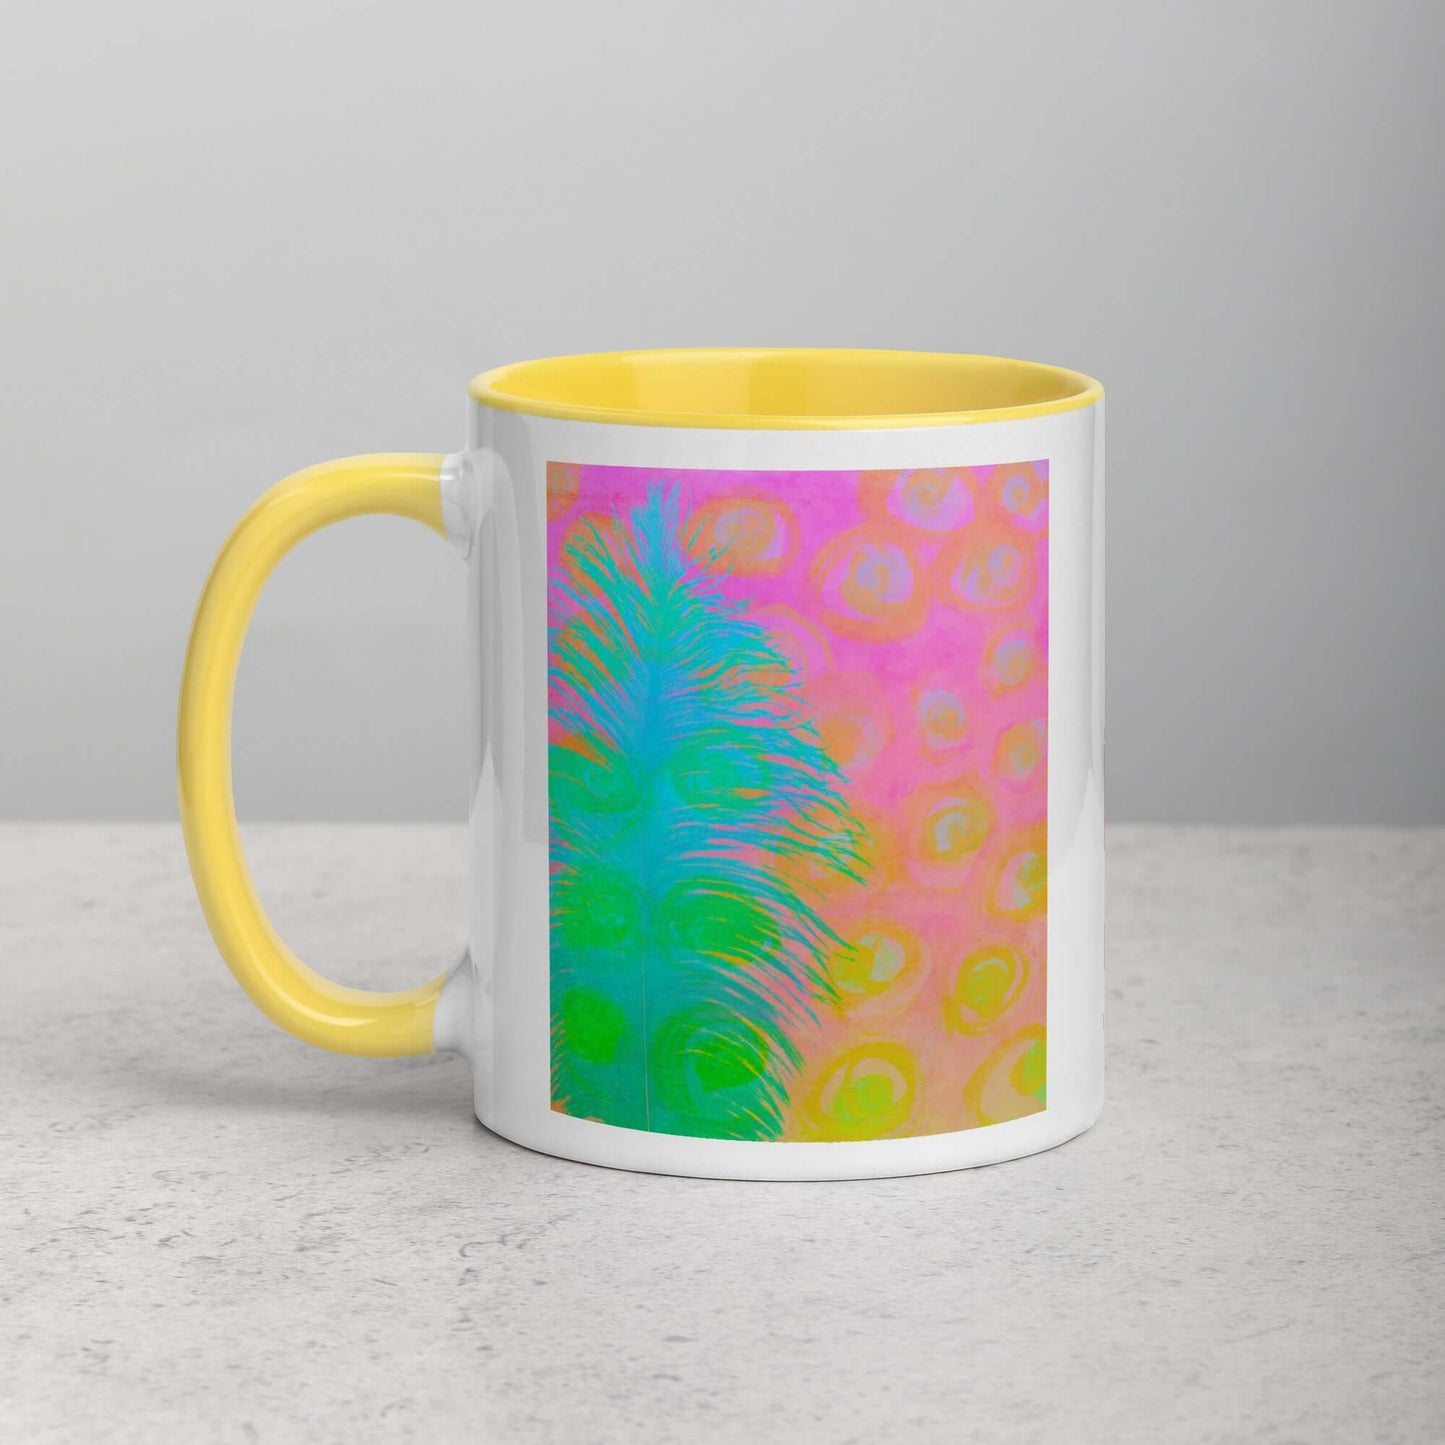 Bright Blue-Green Ostrich Feather on Pink and Yellow Background “My Other Half” Abstract Art Mug with Bright Yellow Color Inside Left Handed Front View